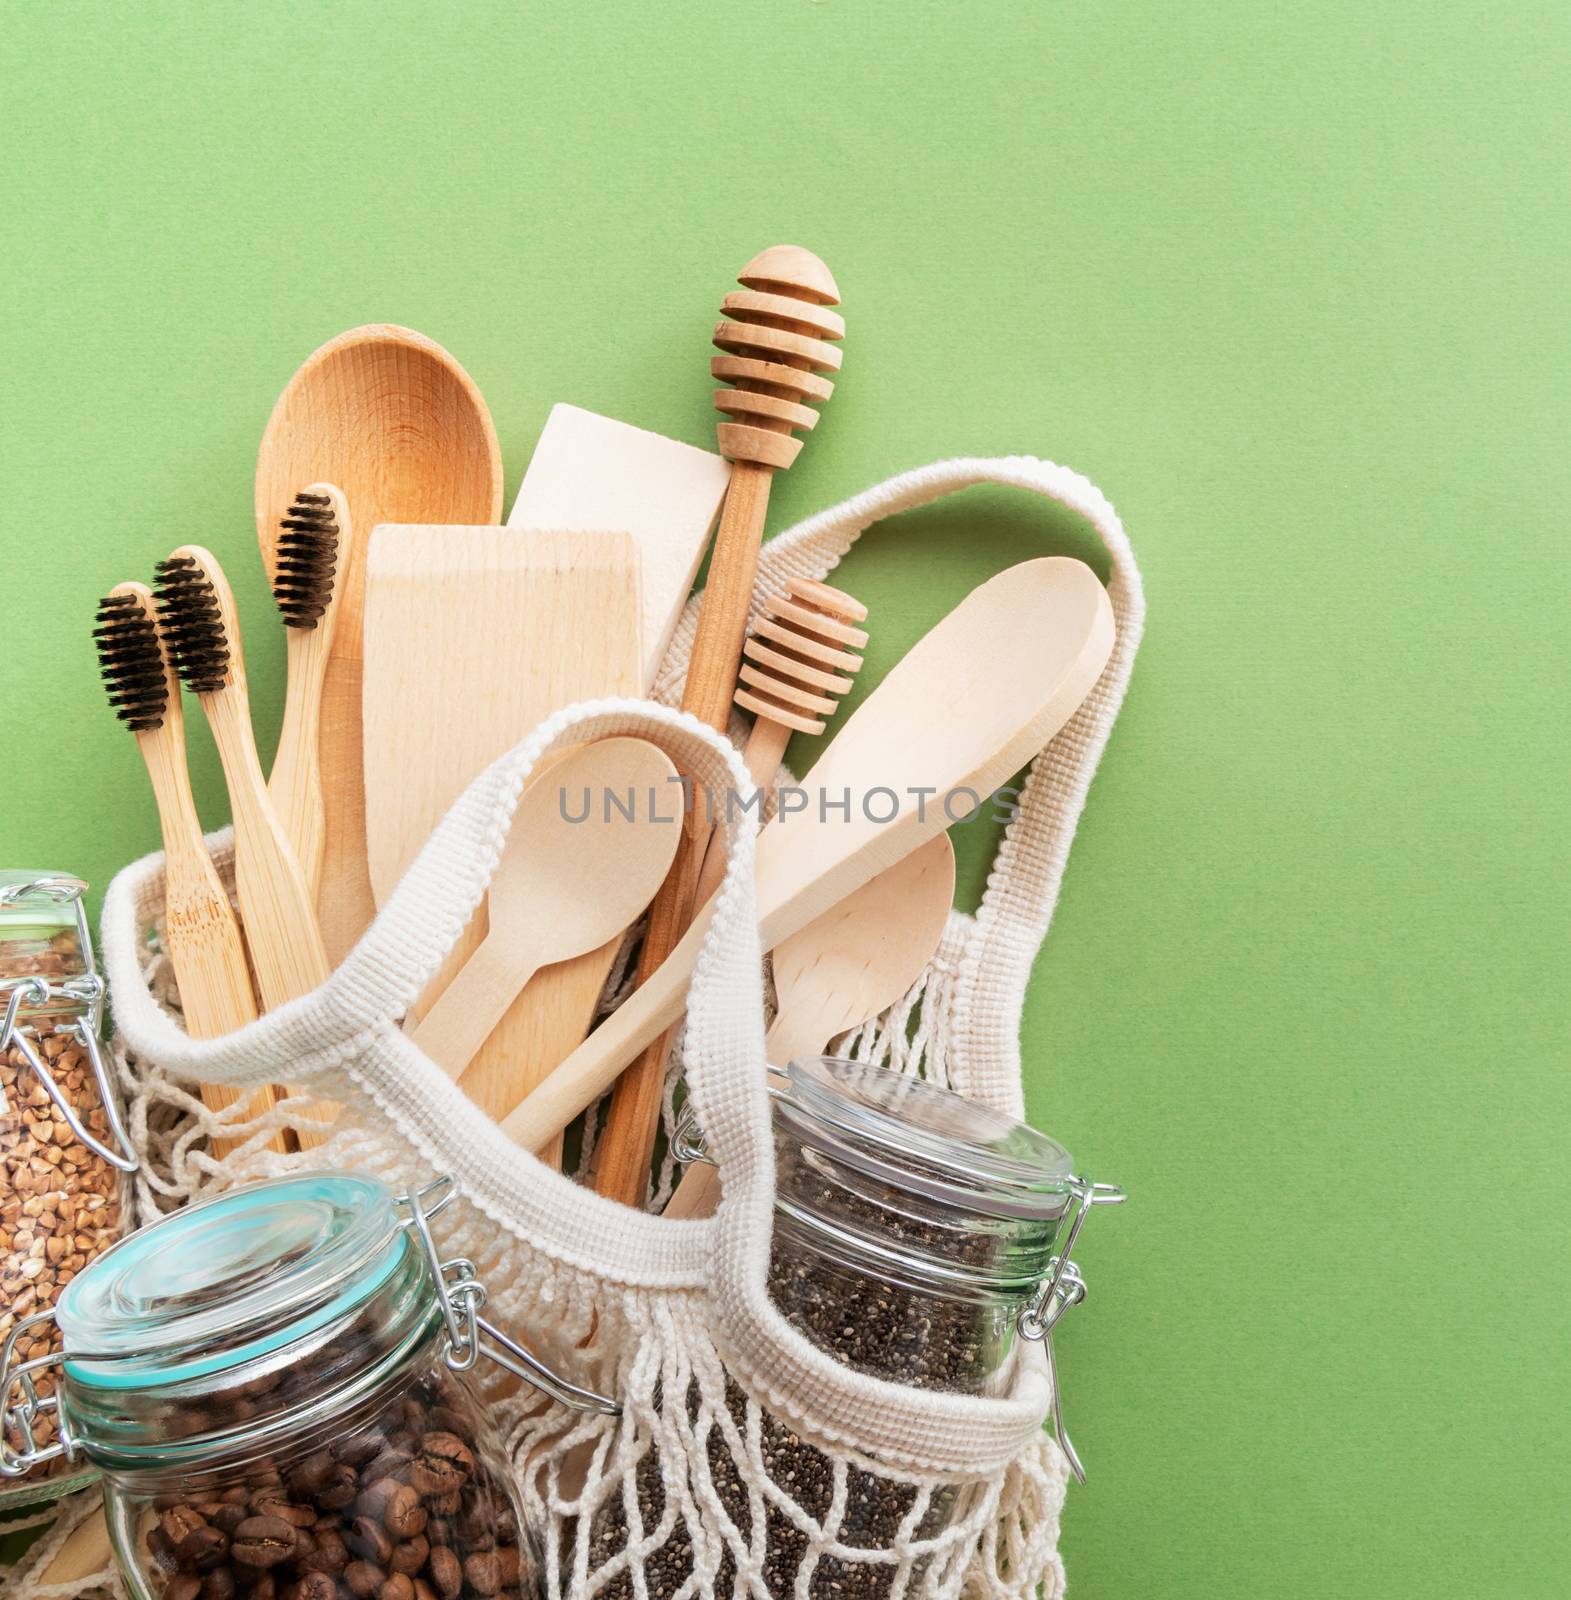 Zero waste eco friendly bag and wooden tools top view on green background with copy space